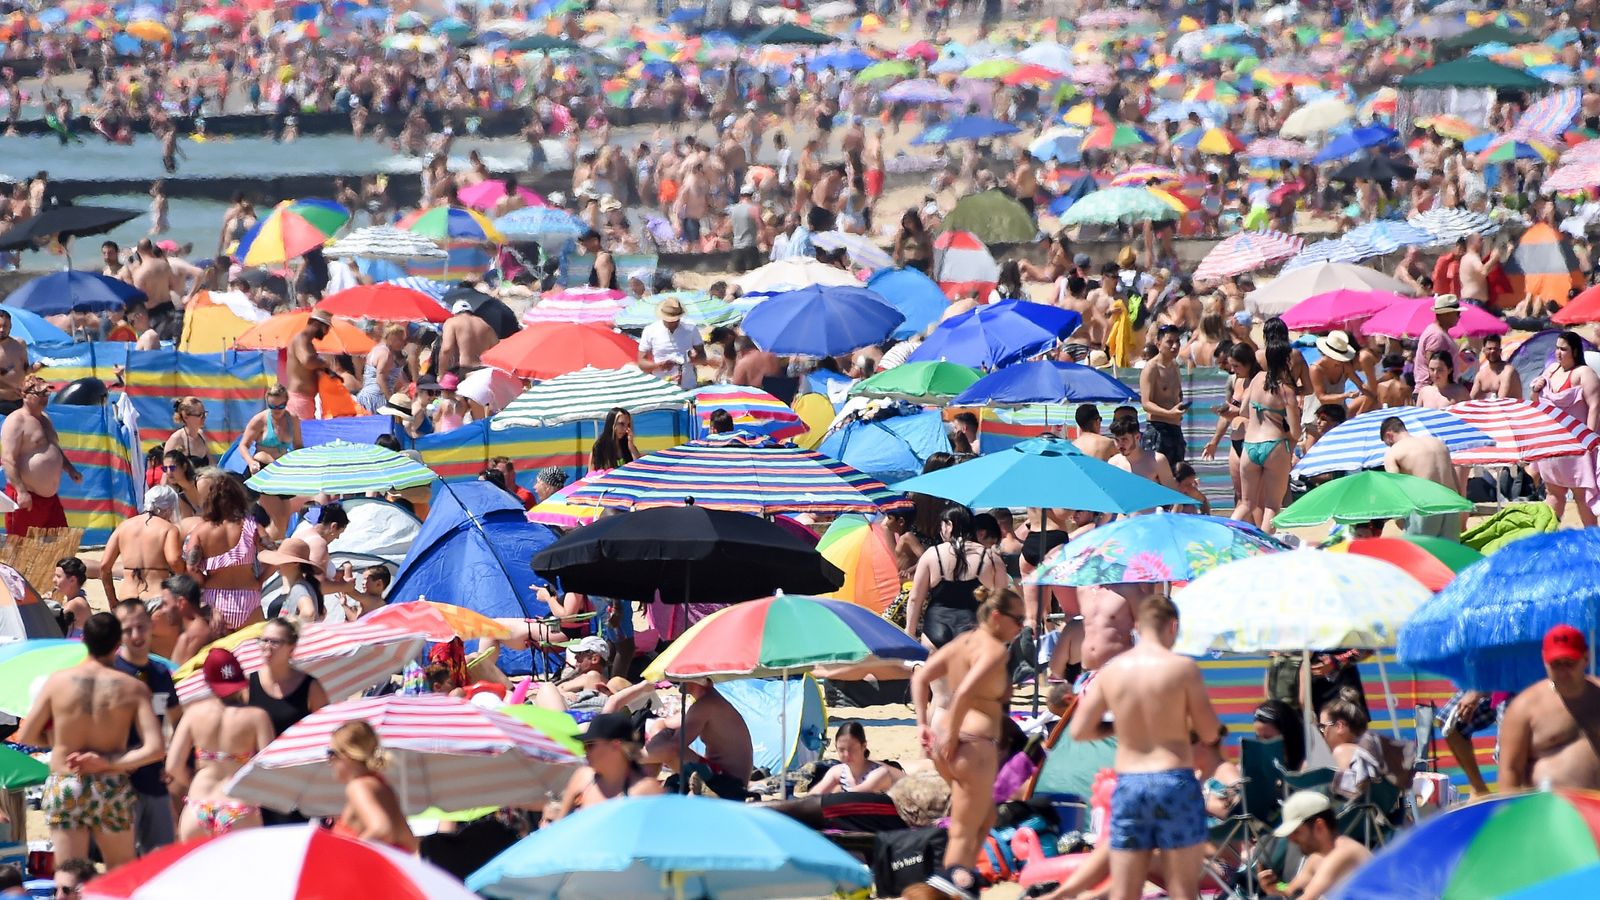 UK weather Friday could be hottest day of the year so far UK News